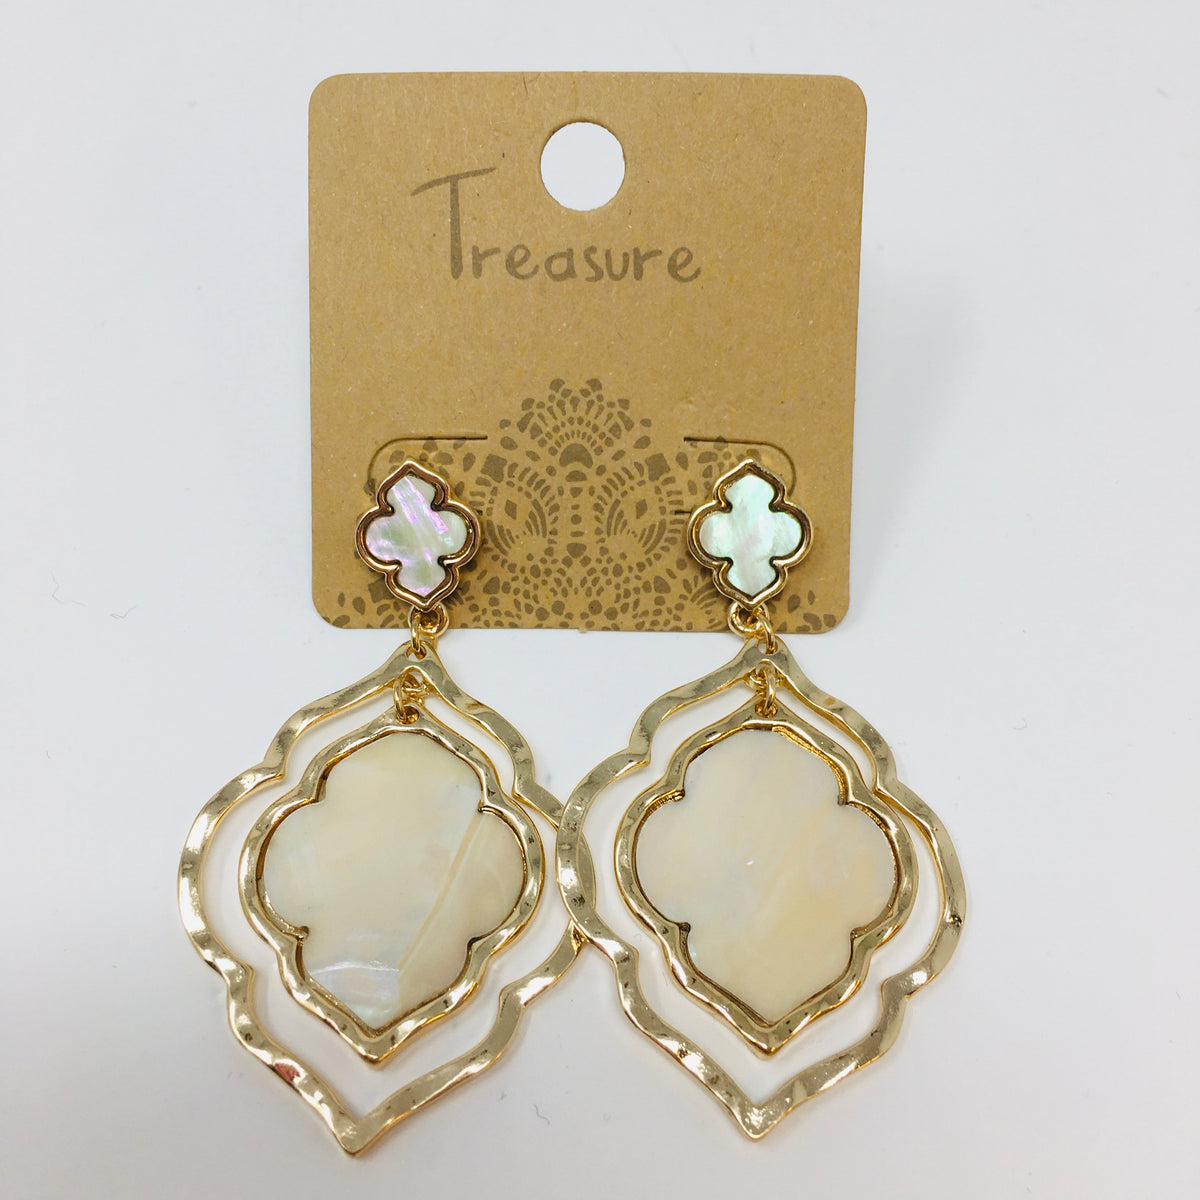 double layer arabesque shaped gold tone earrings with mother of pearl inserts shown on a white background